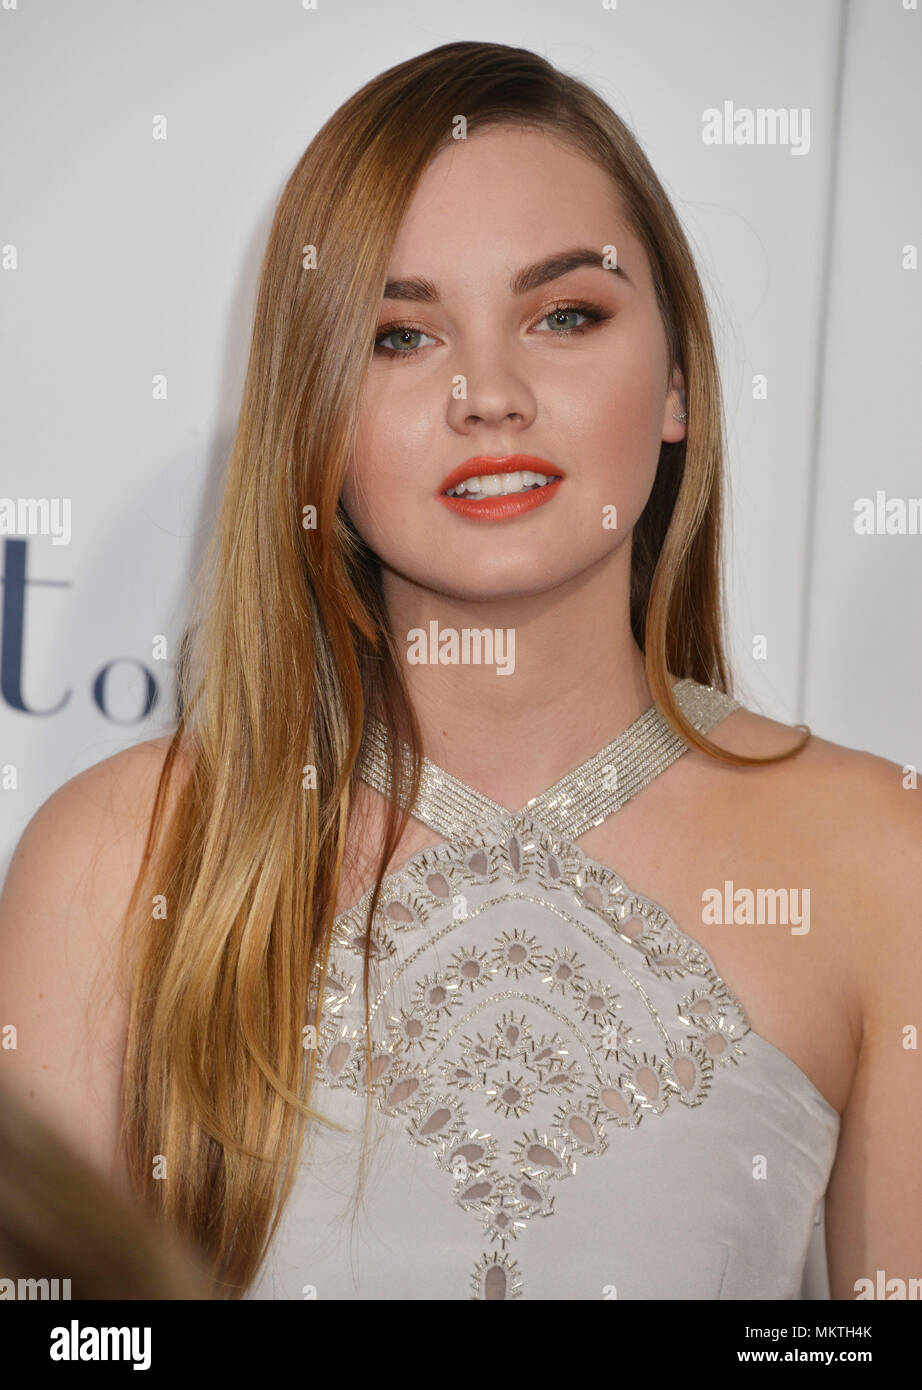 Liana Liberato  at the The Best of Me premiere at the Regal Theatre inLos Angeles.Liana Liberato 050 Red Carpet Event, Vertical, USA, Film Industry, Celebrities,  Photography, Bestof, Arts Culture and Entertainment, Topix Celebrities fashion /  Vertical, Best of, Event in Hollywood Life - California,  Red Carpet and backstage, USA, Film Industry, Celebrities,  movie celebrities, TV celebrities, Music celebrities, Photography, Bestof, Arts Culture and Entertainment,  Topix, headshot, vertical, one person,, from the year , 2014, inquiry tsuni@Gamma-USA.com Stock Photo